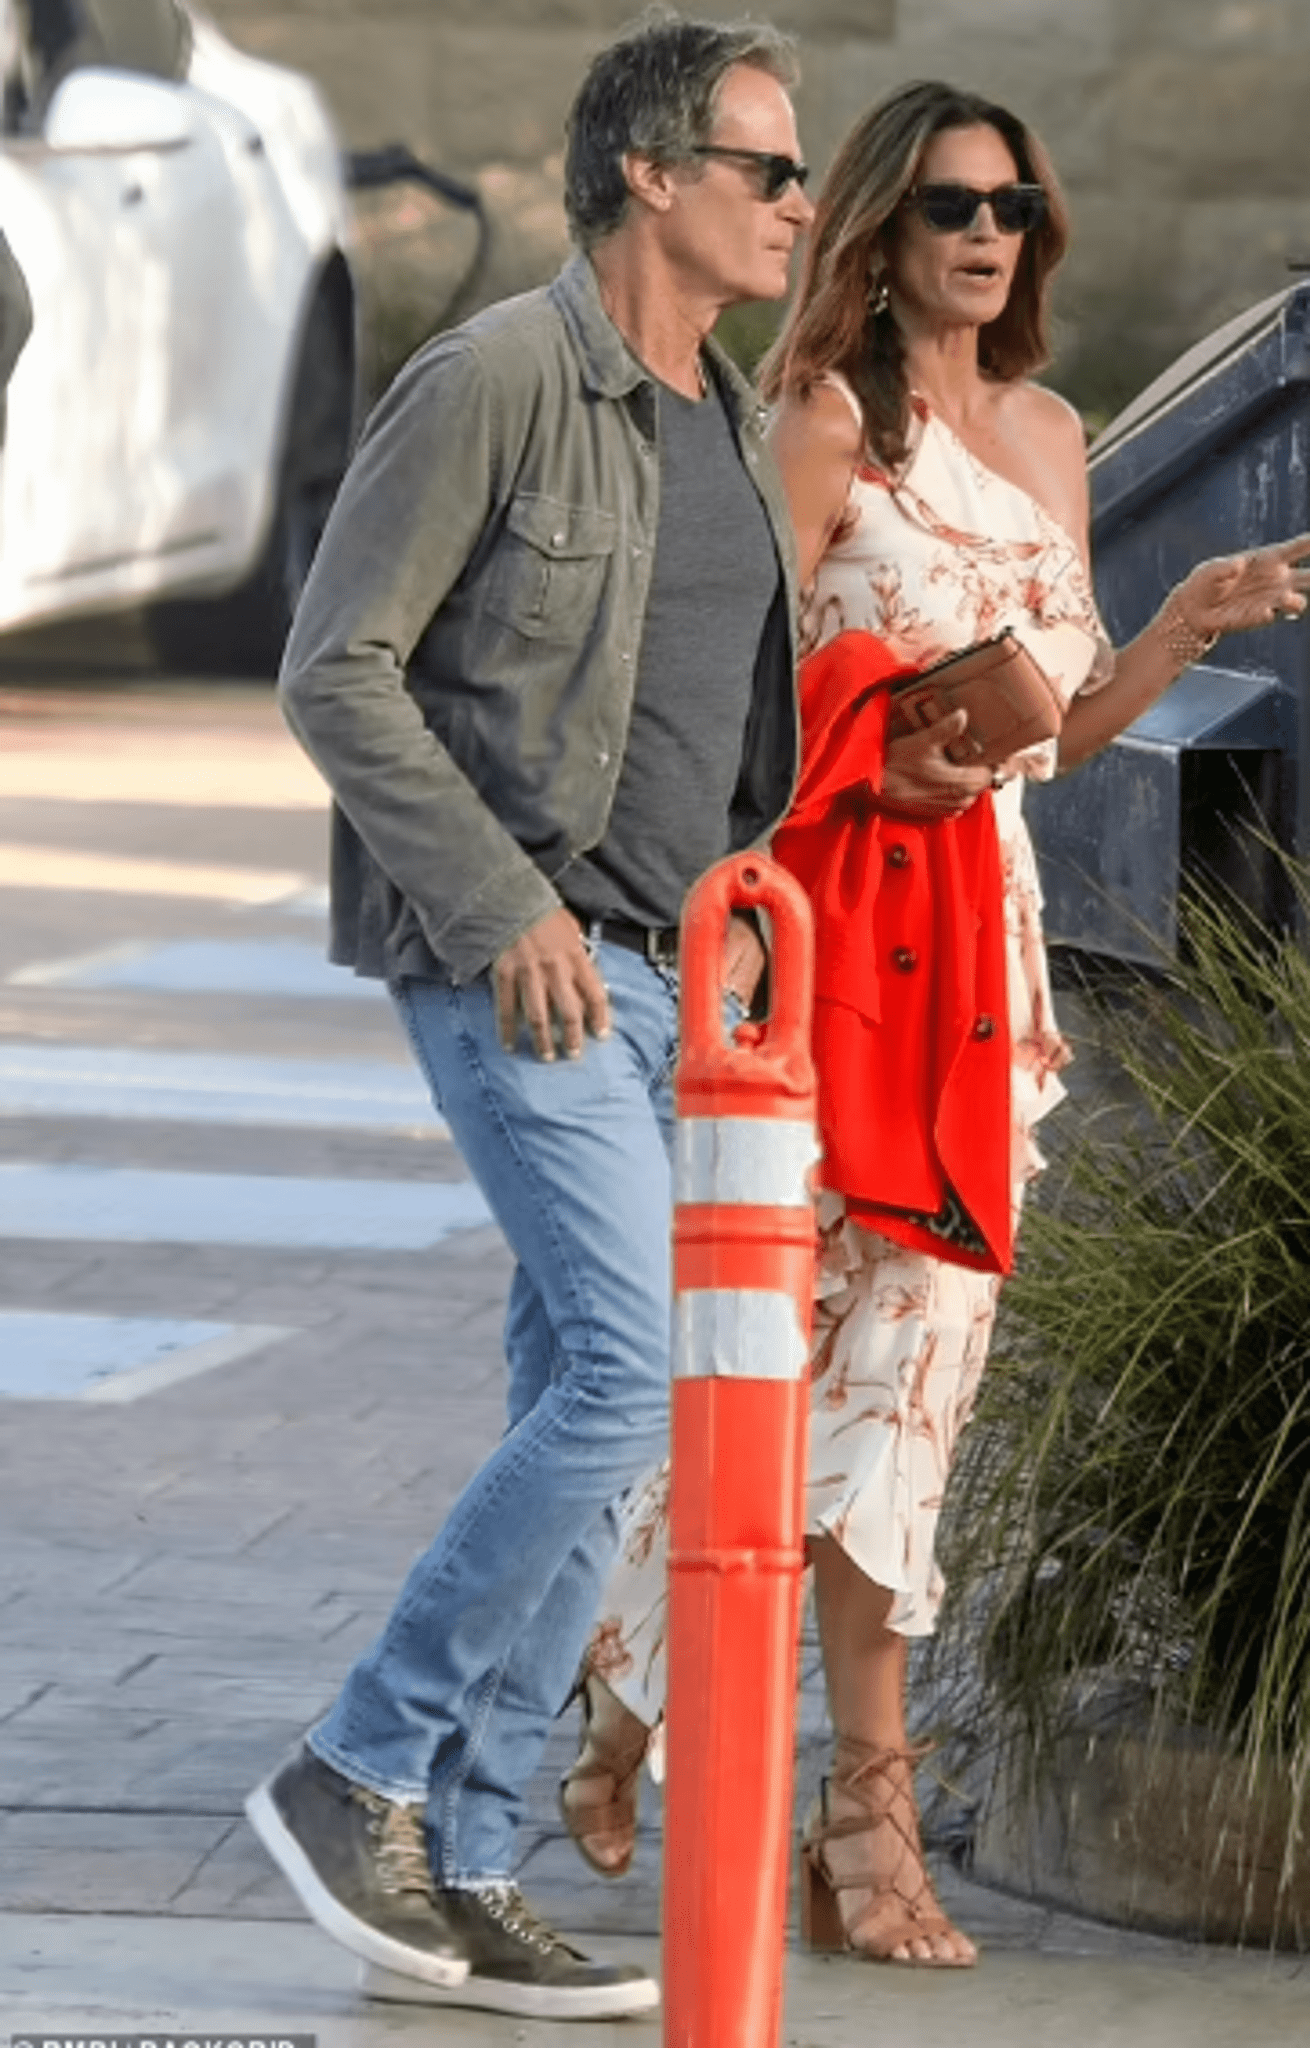 56-year-old-cindy-crawford-went-on-a-date-with-her-husband-in-an-elegant-outfit-that-will-repeat-any-way